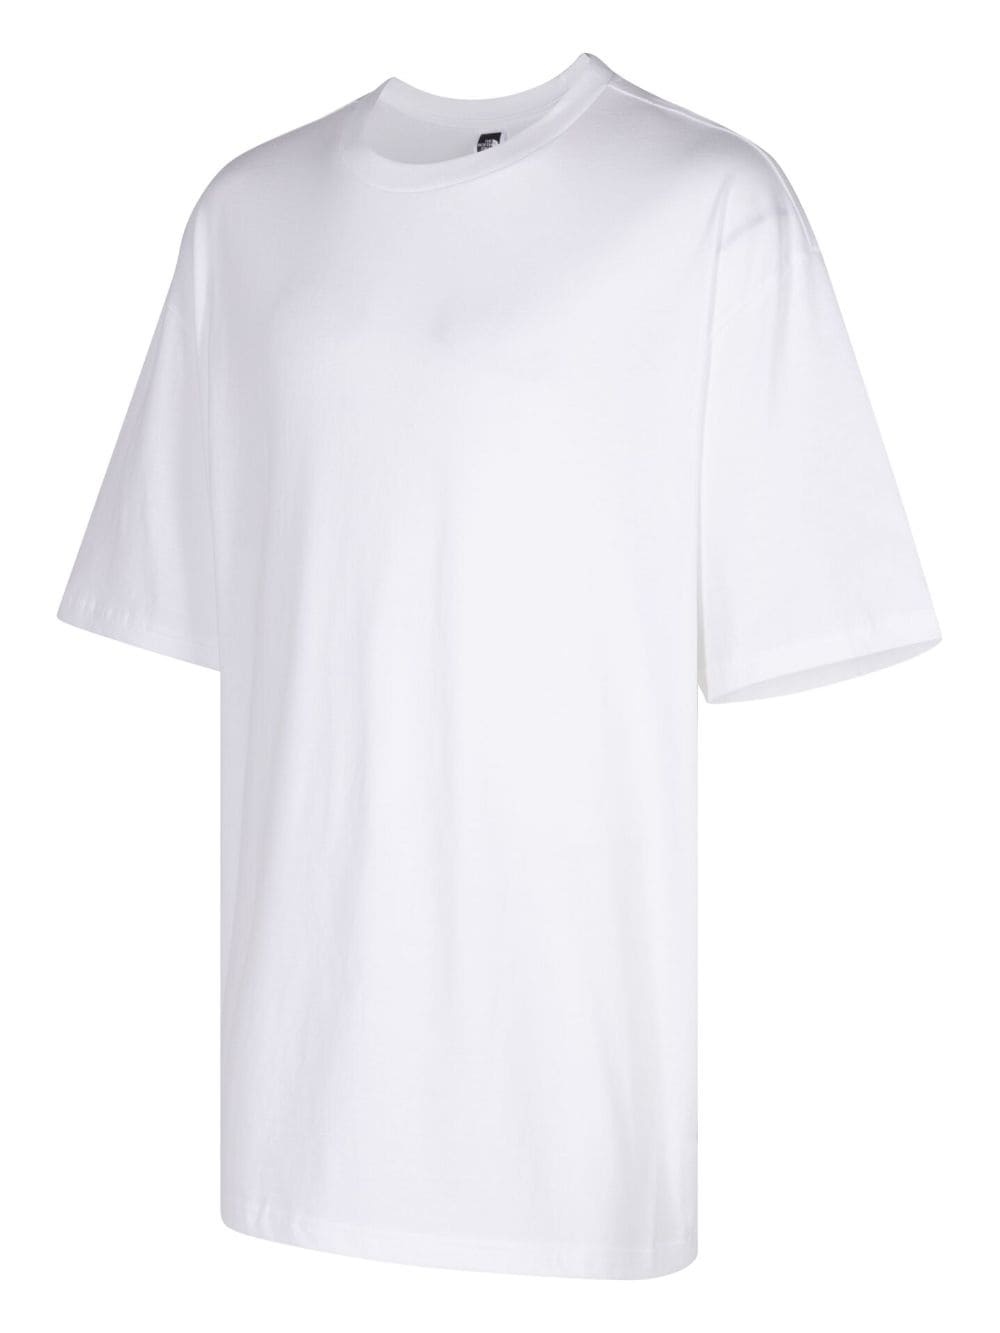 x The North Face "White" T-shirt - 3